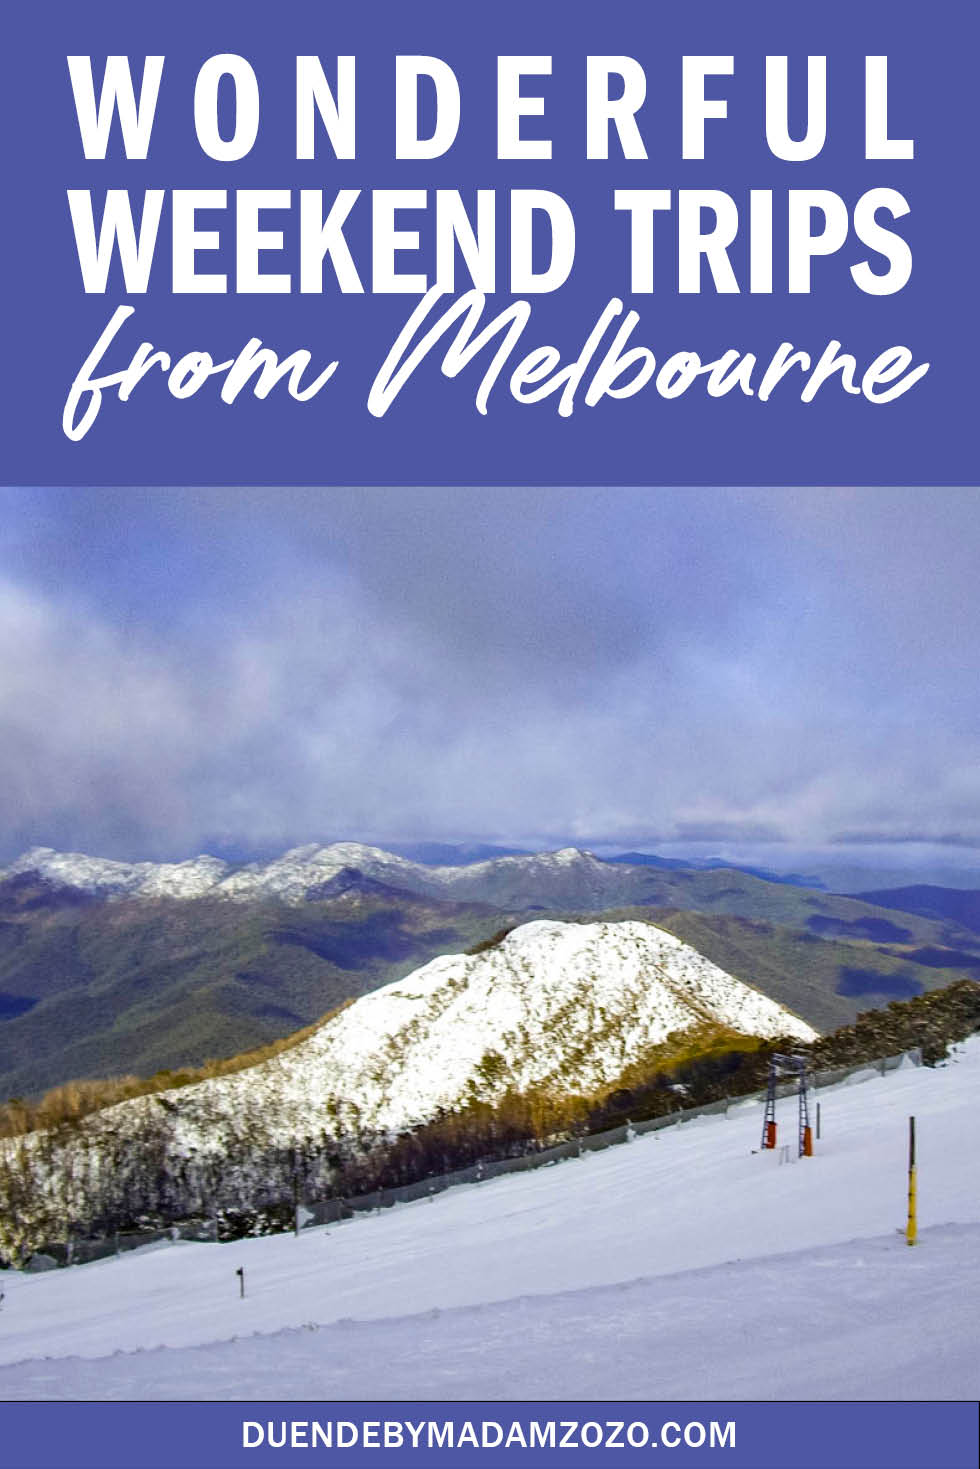 Image of ski field with mountaintops in background and text overlay reading "Wonderful Weekend Trips From Melbourne"